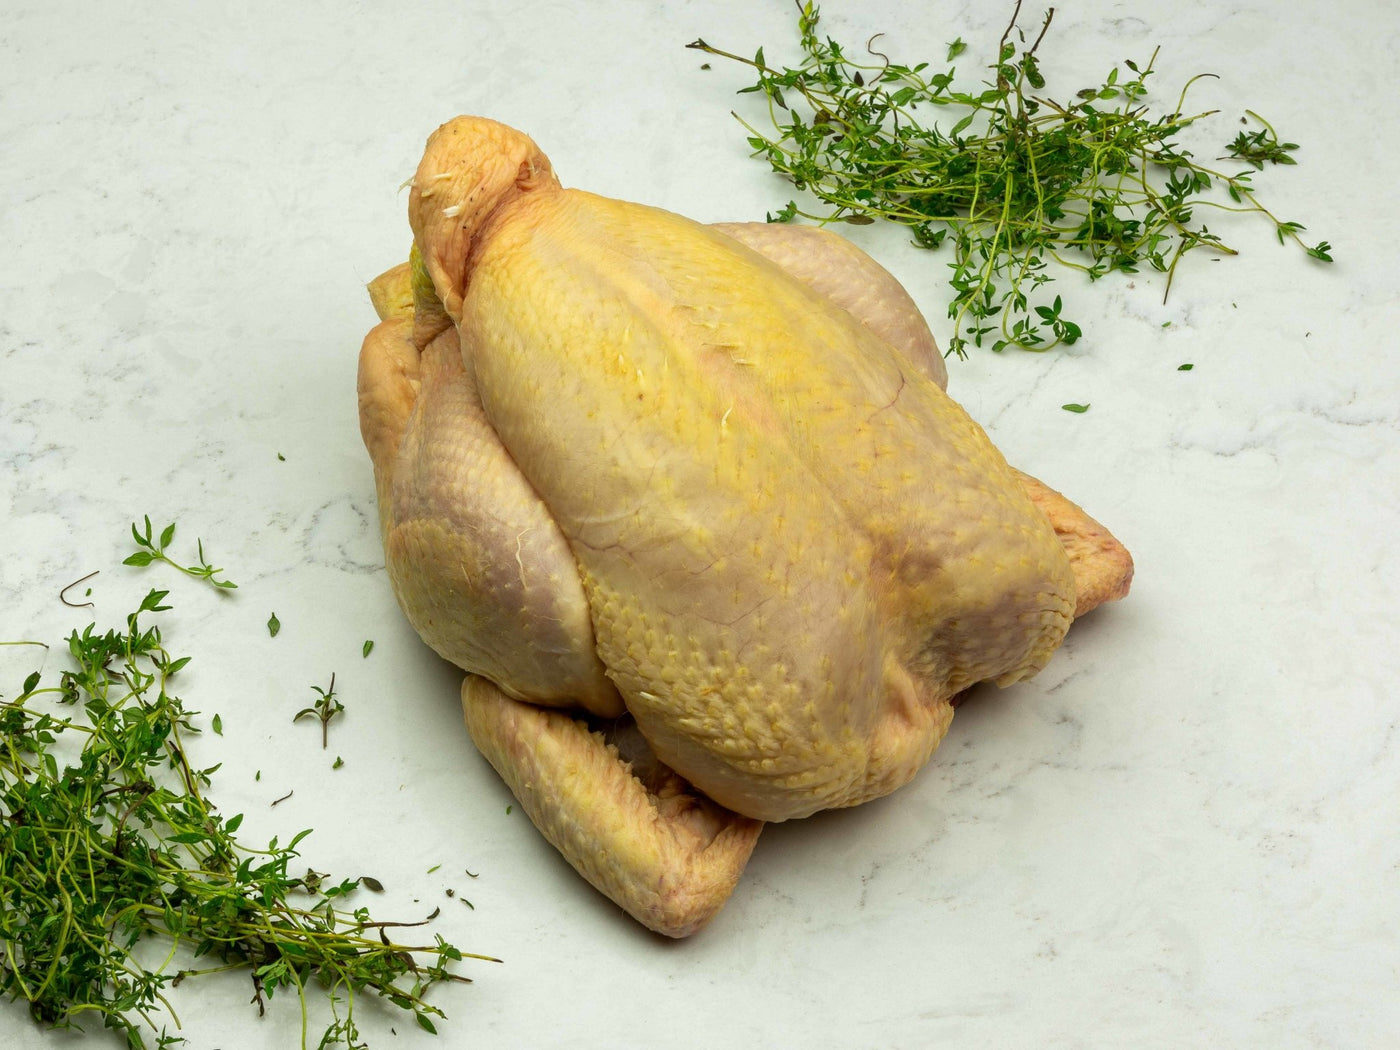 Whole Free Range Label Anglais Chicken - Chicken - Thomas Joseph Butchery - Ethical Dry-Aged Meat The Best Steak UK Thomas Joseph Butchery